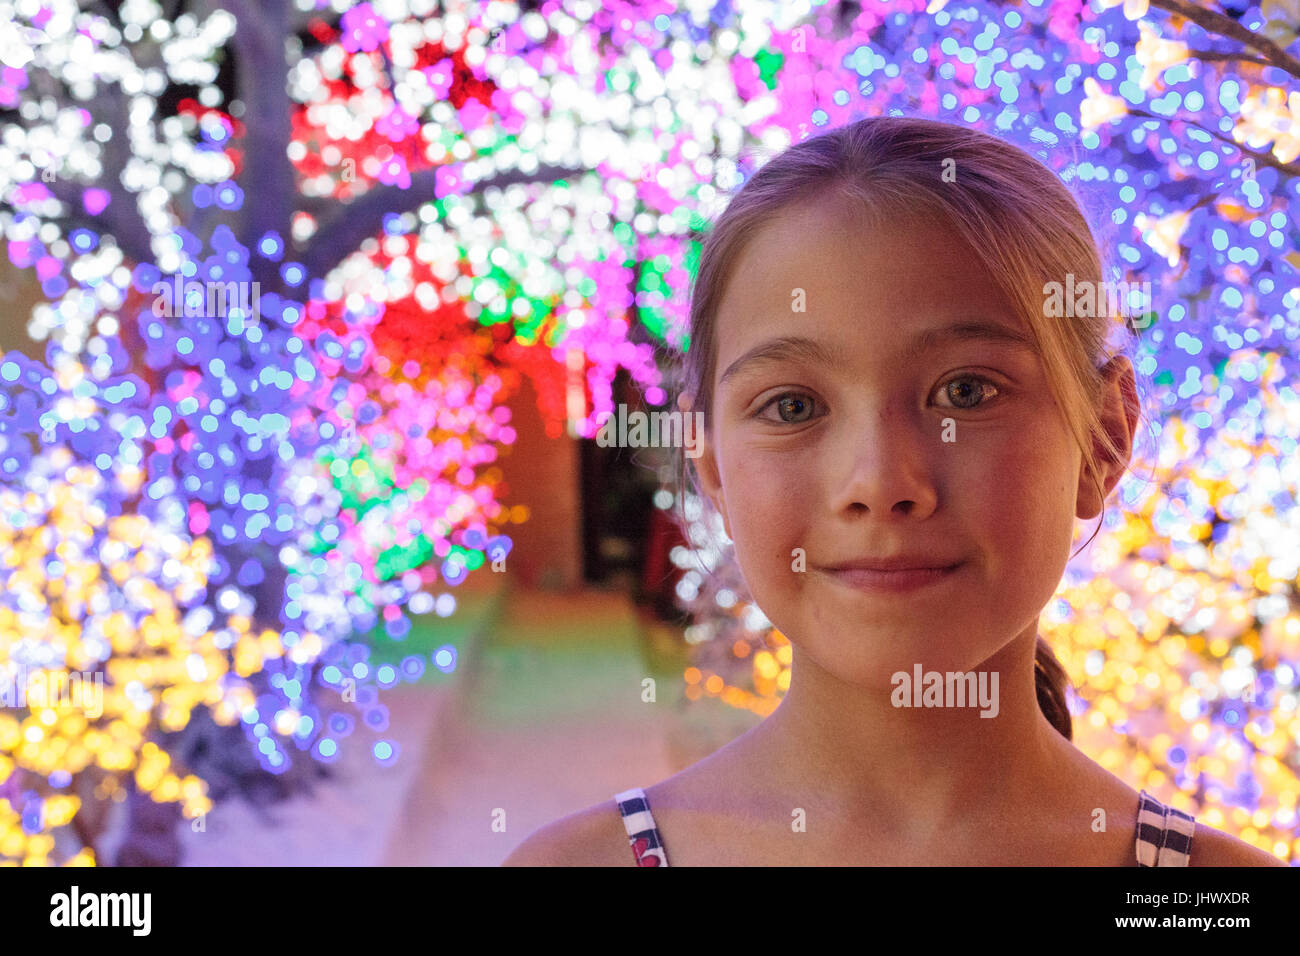 Smiling young Caucasian girl with bright lights in tress behind her Stock Photo